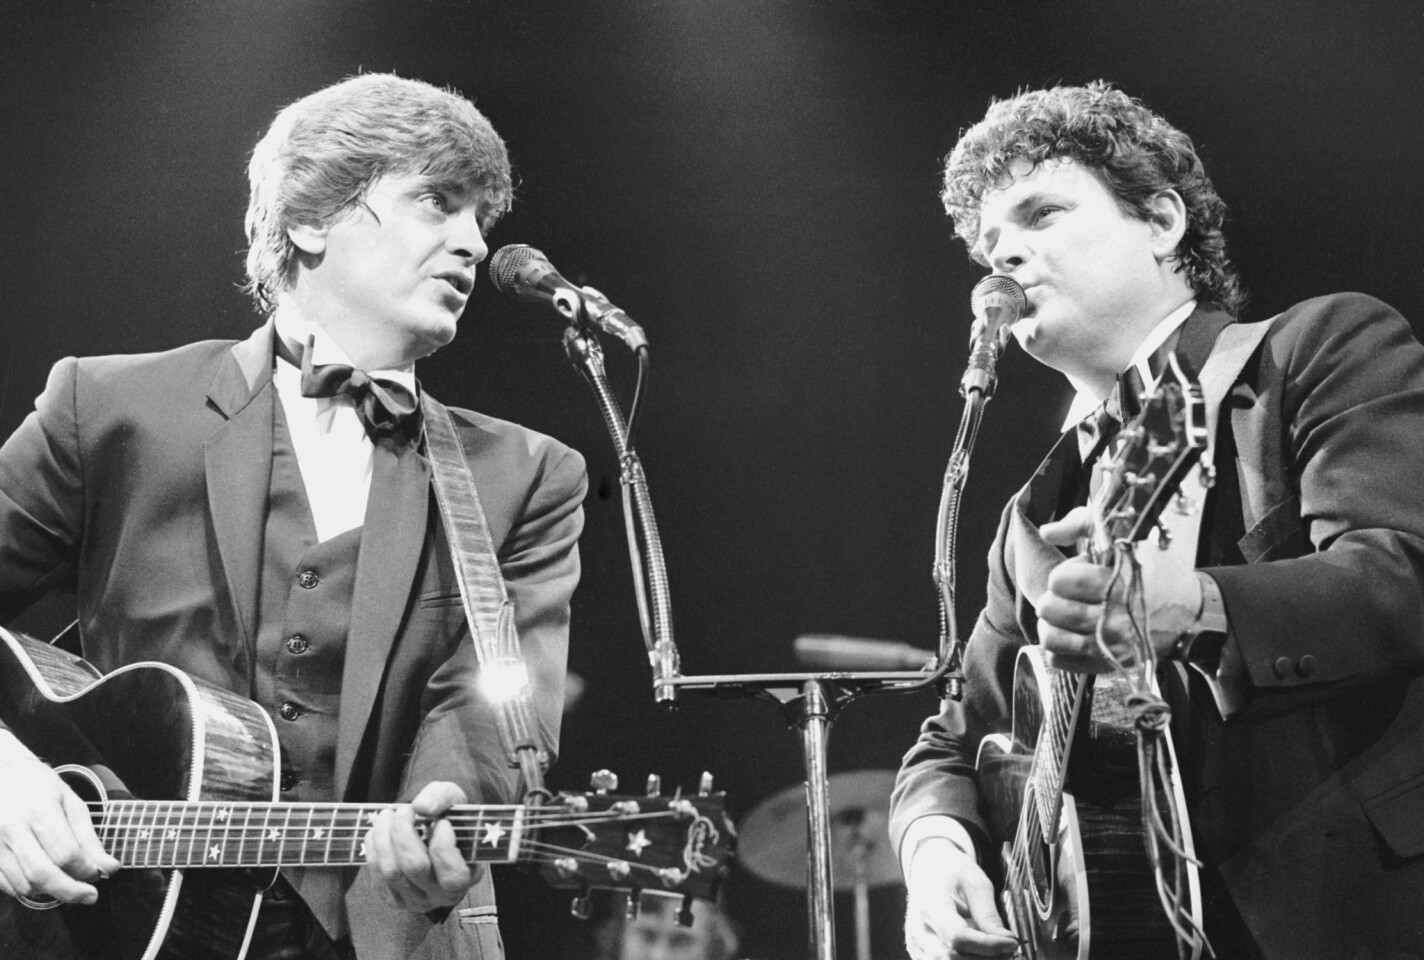 Phil, left, and Don Everly, perform at their reunion concert at the Royal Albert Hall, London, on Sept. 23, 1983.